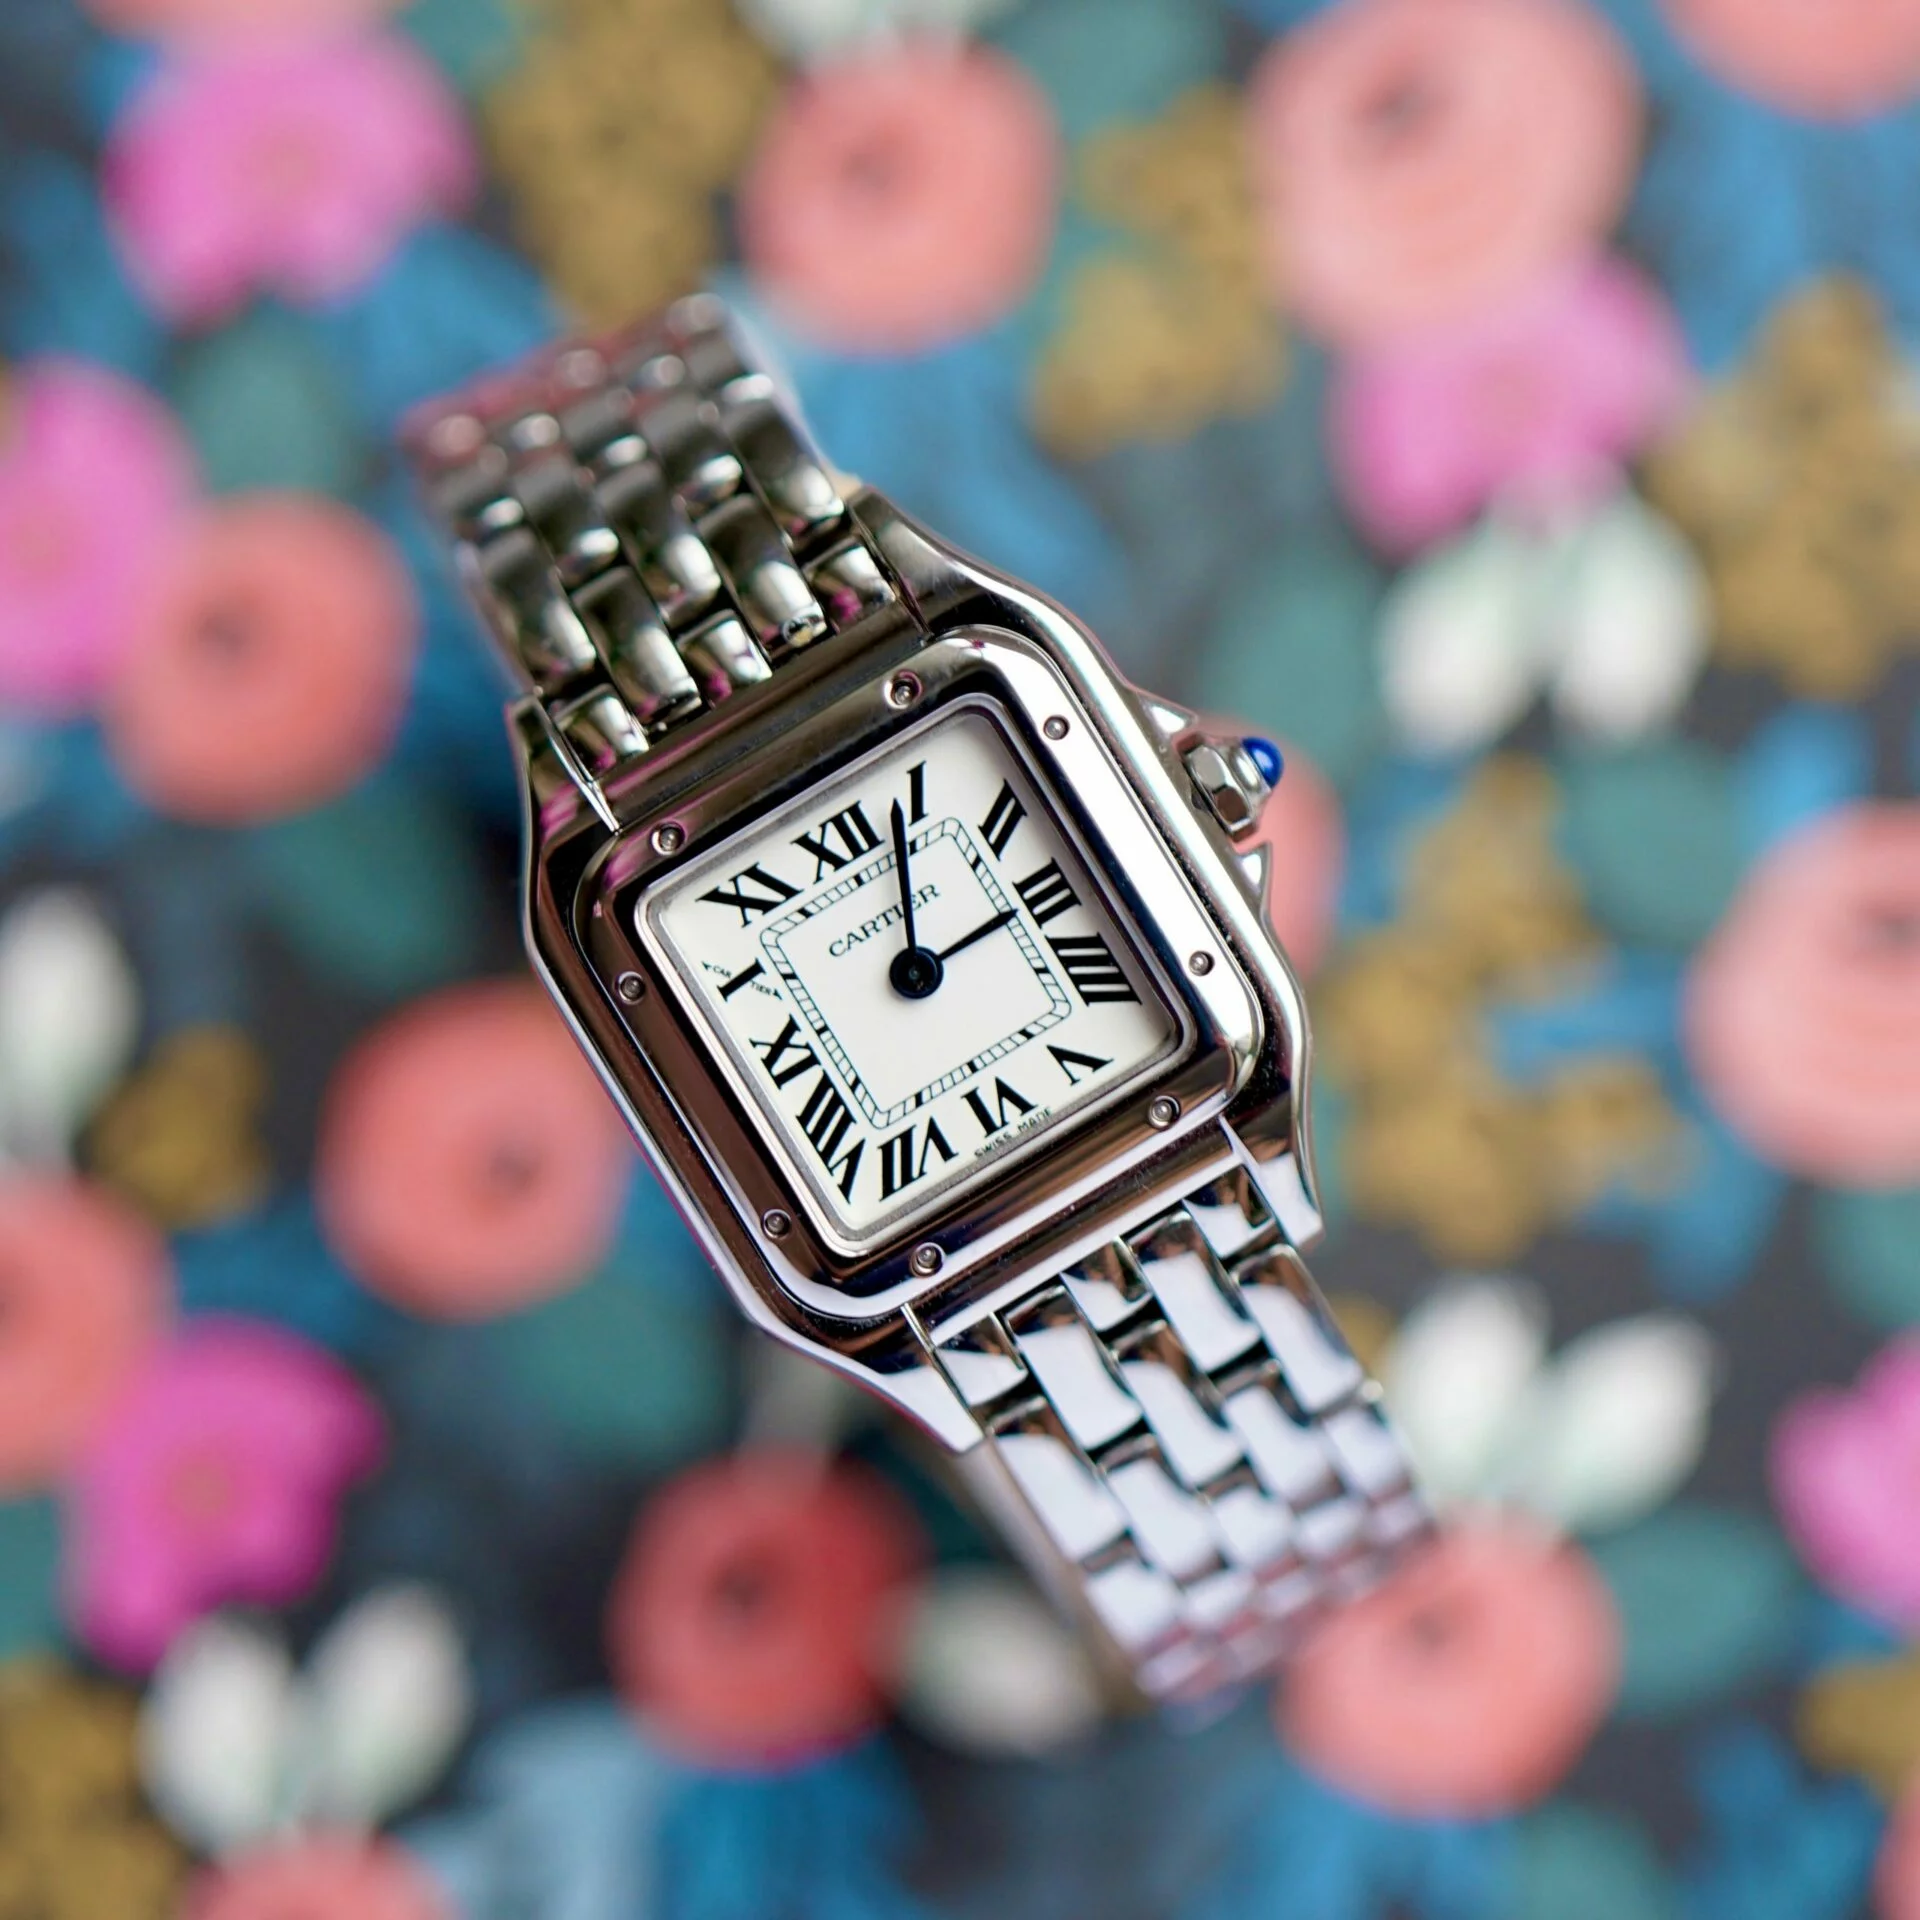 WHO TO FOLLOW: @ and her amazing watch stories